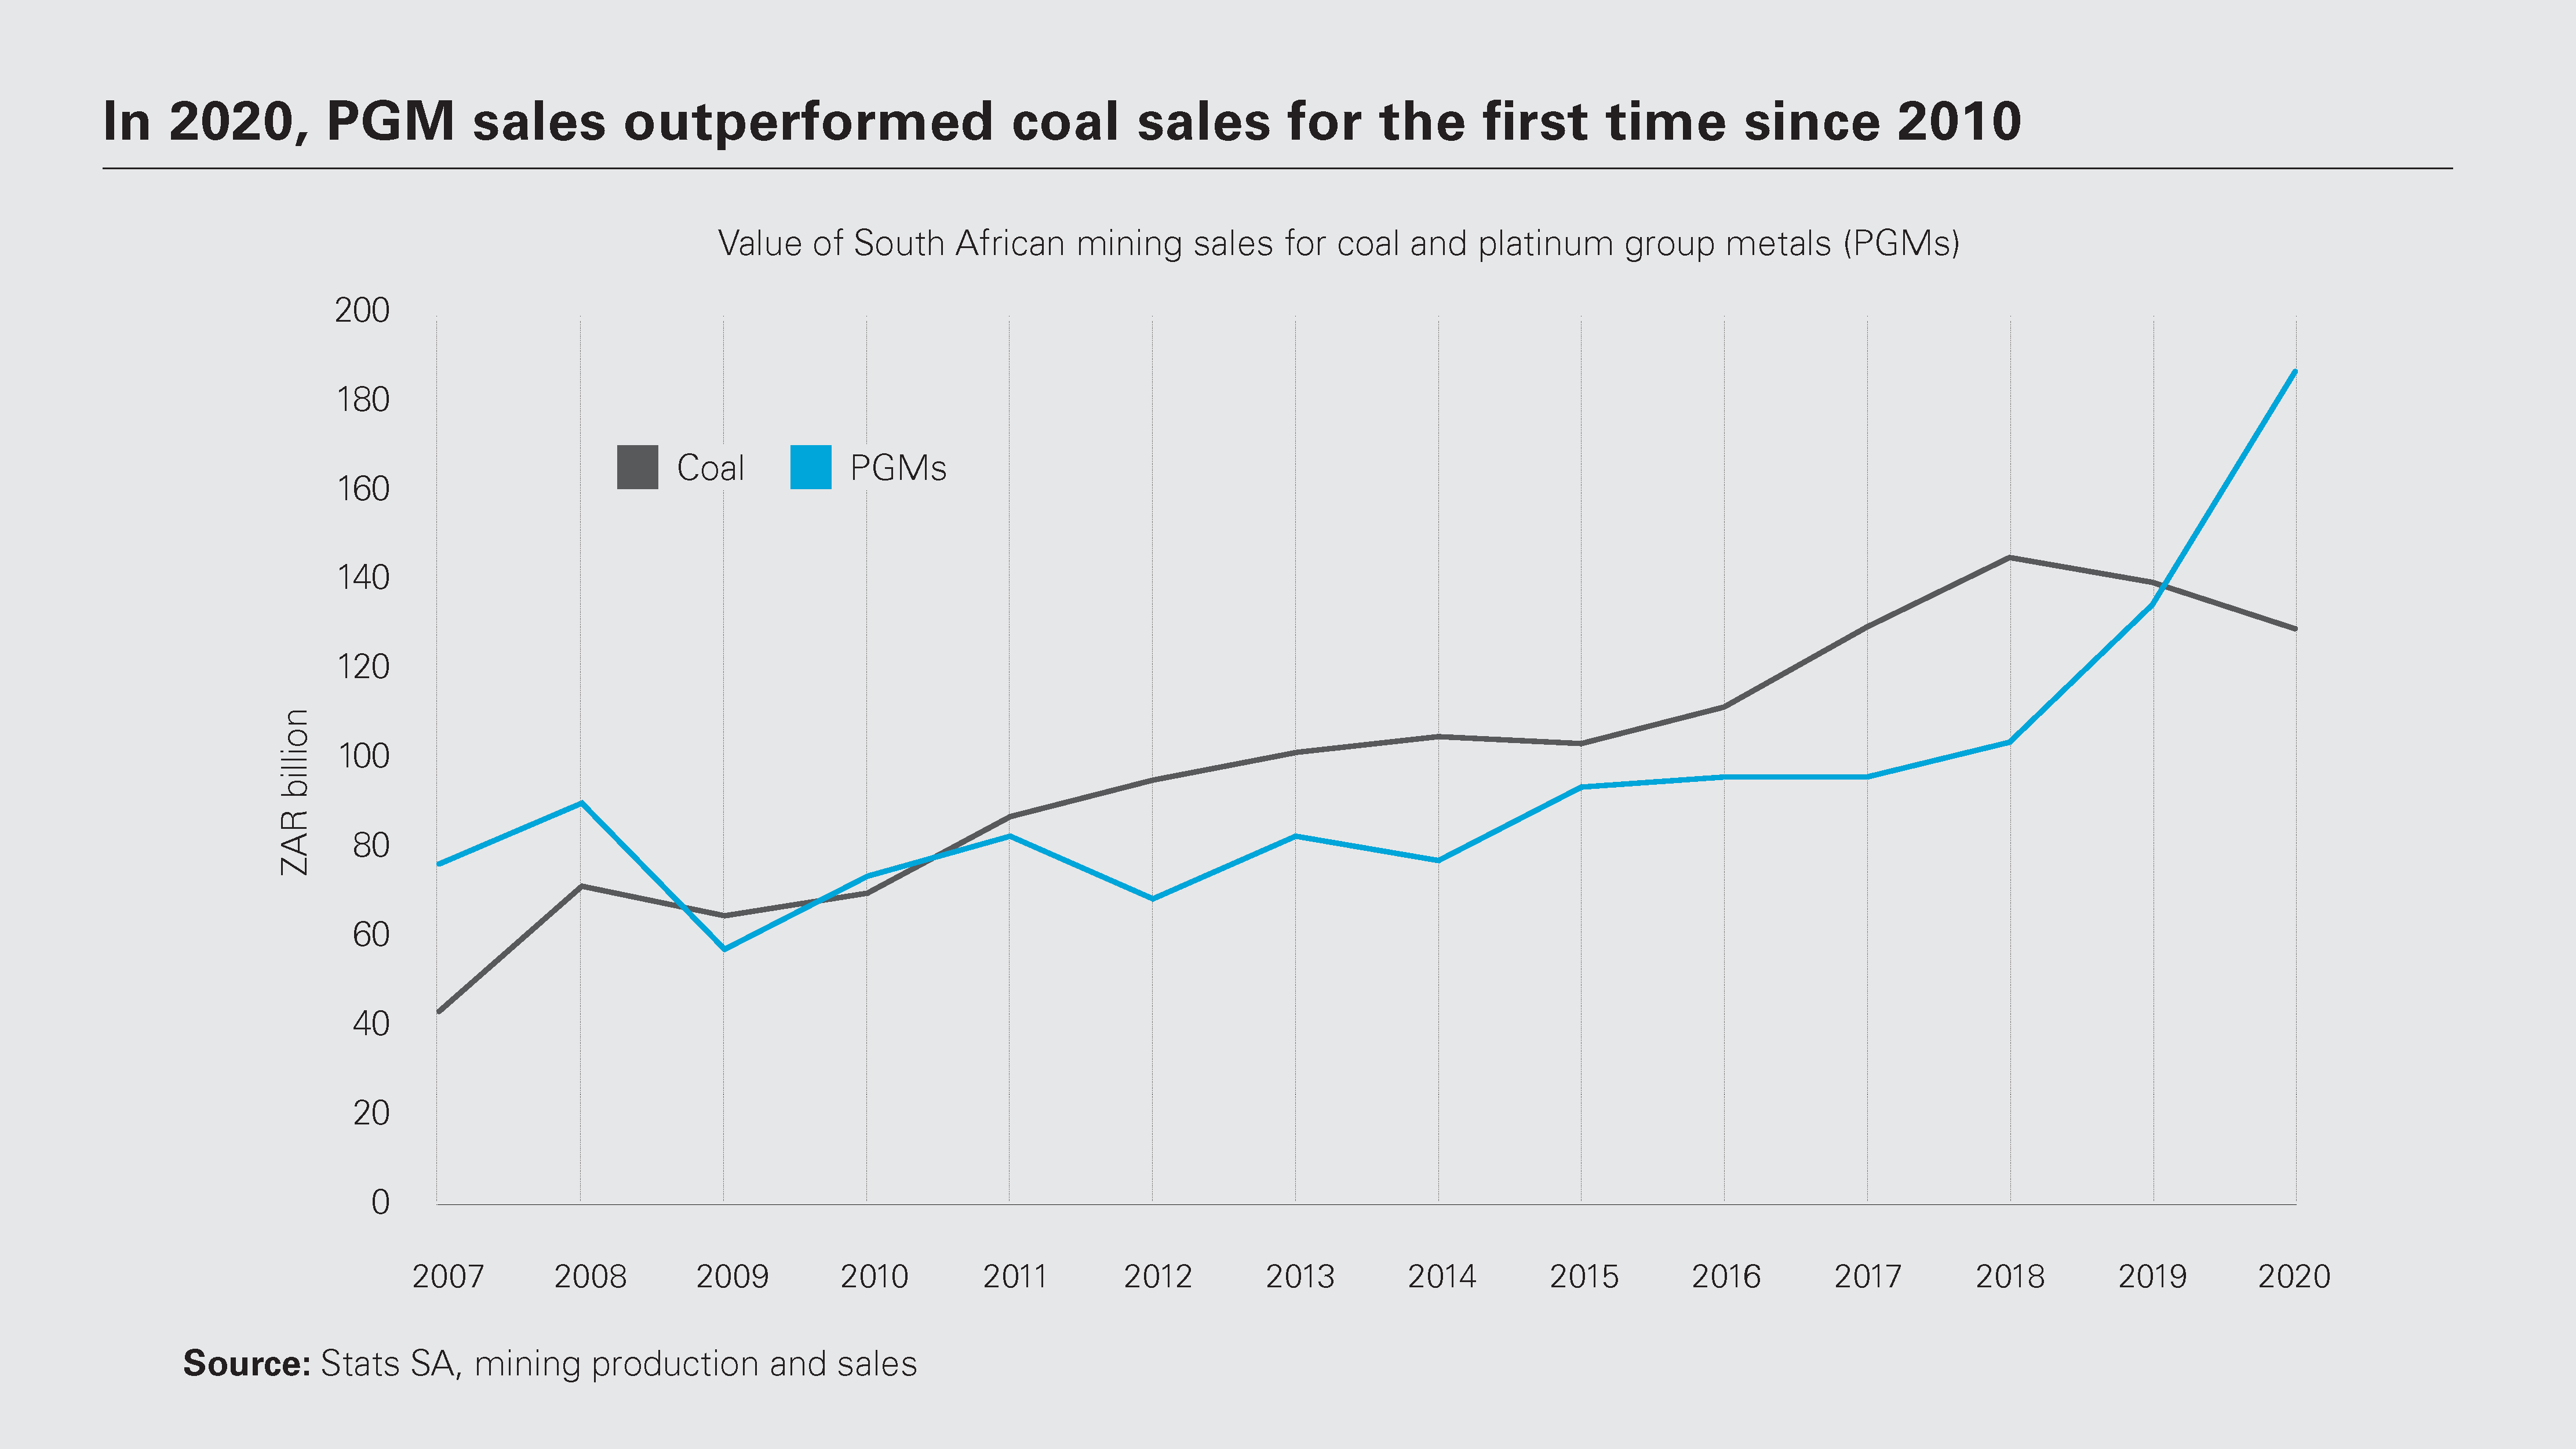 In 2020, PGM sales outperformed coal sales for the first time since 2010